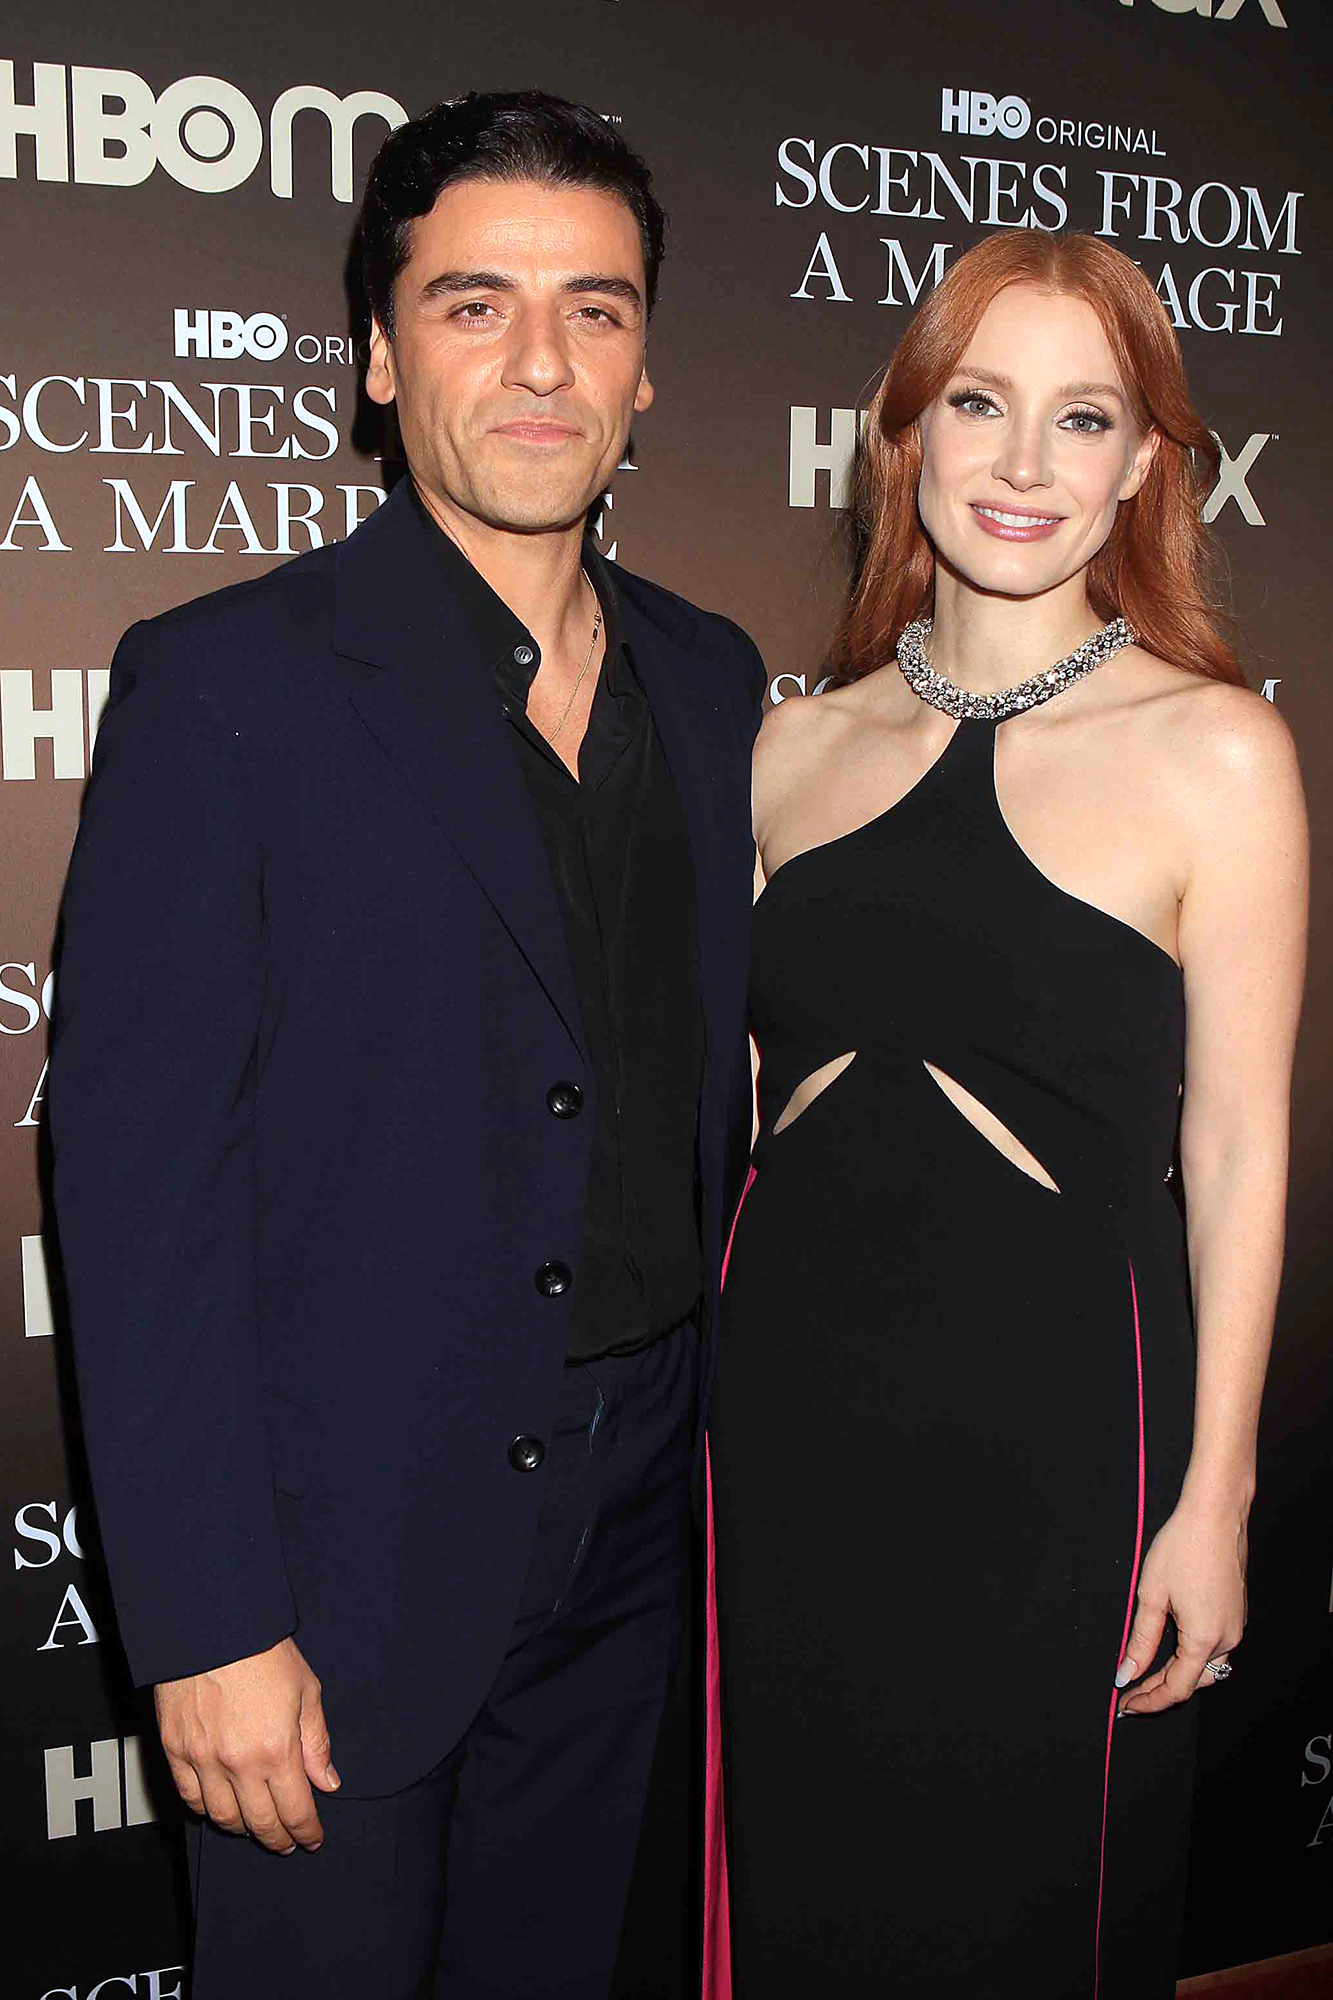 Jessica Chastain Porn Star - Jessica Chastain Had 1 Rule for Doing Nude Scenes With Oscar Isaac